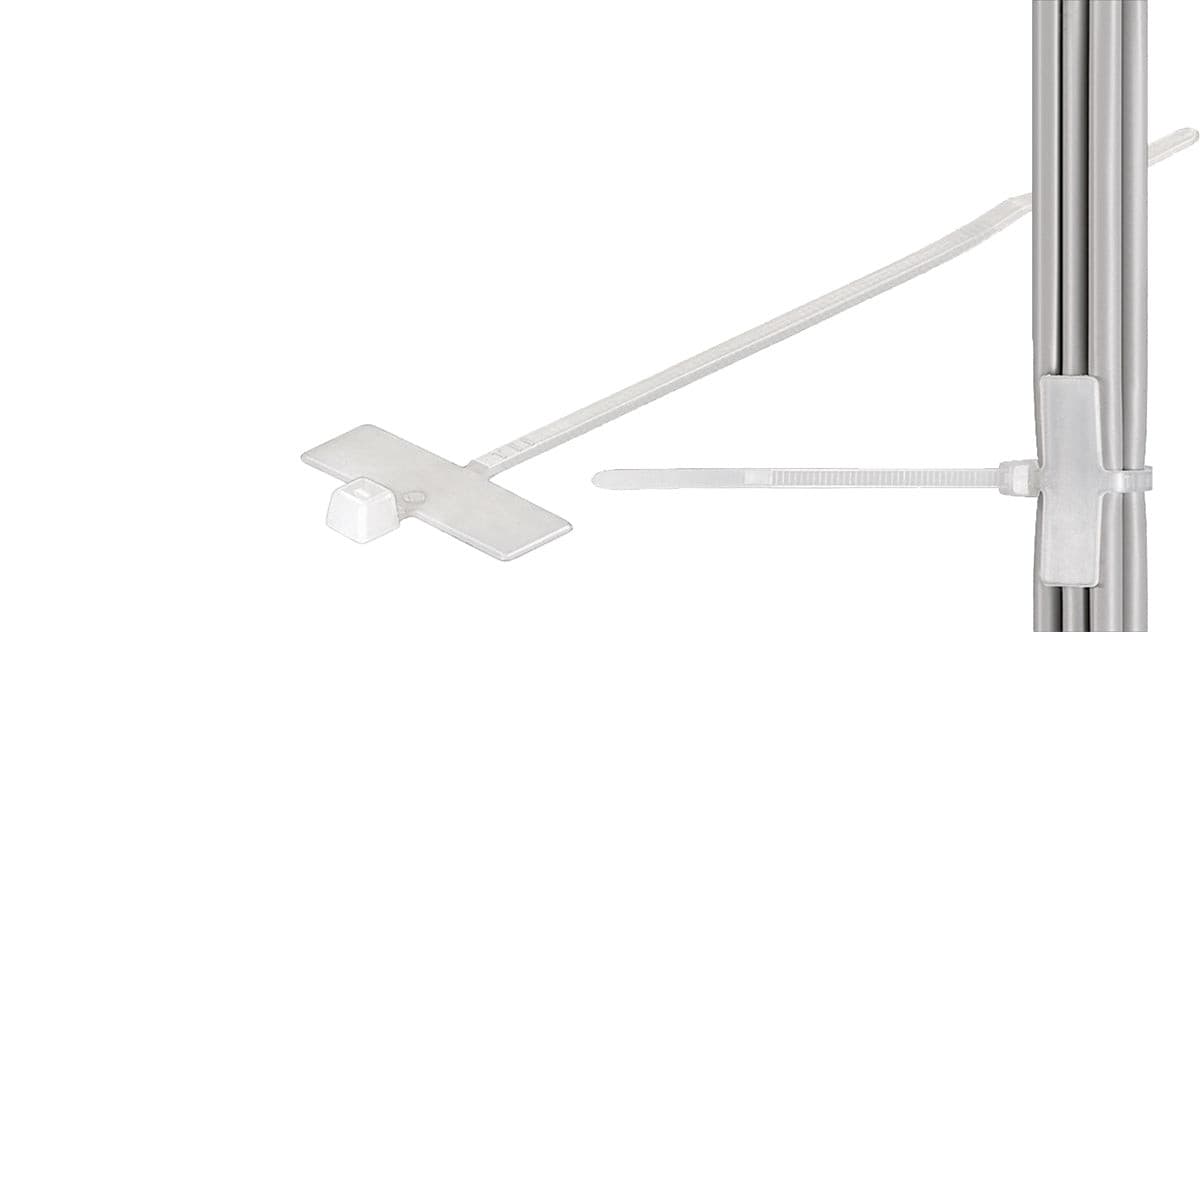 Goobay Cable Marker Tie with Labelling Field - White/Transparent.